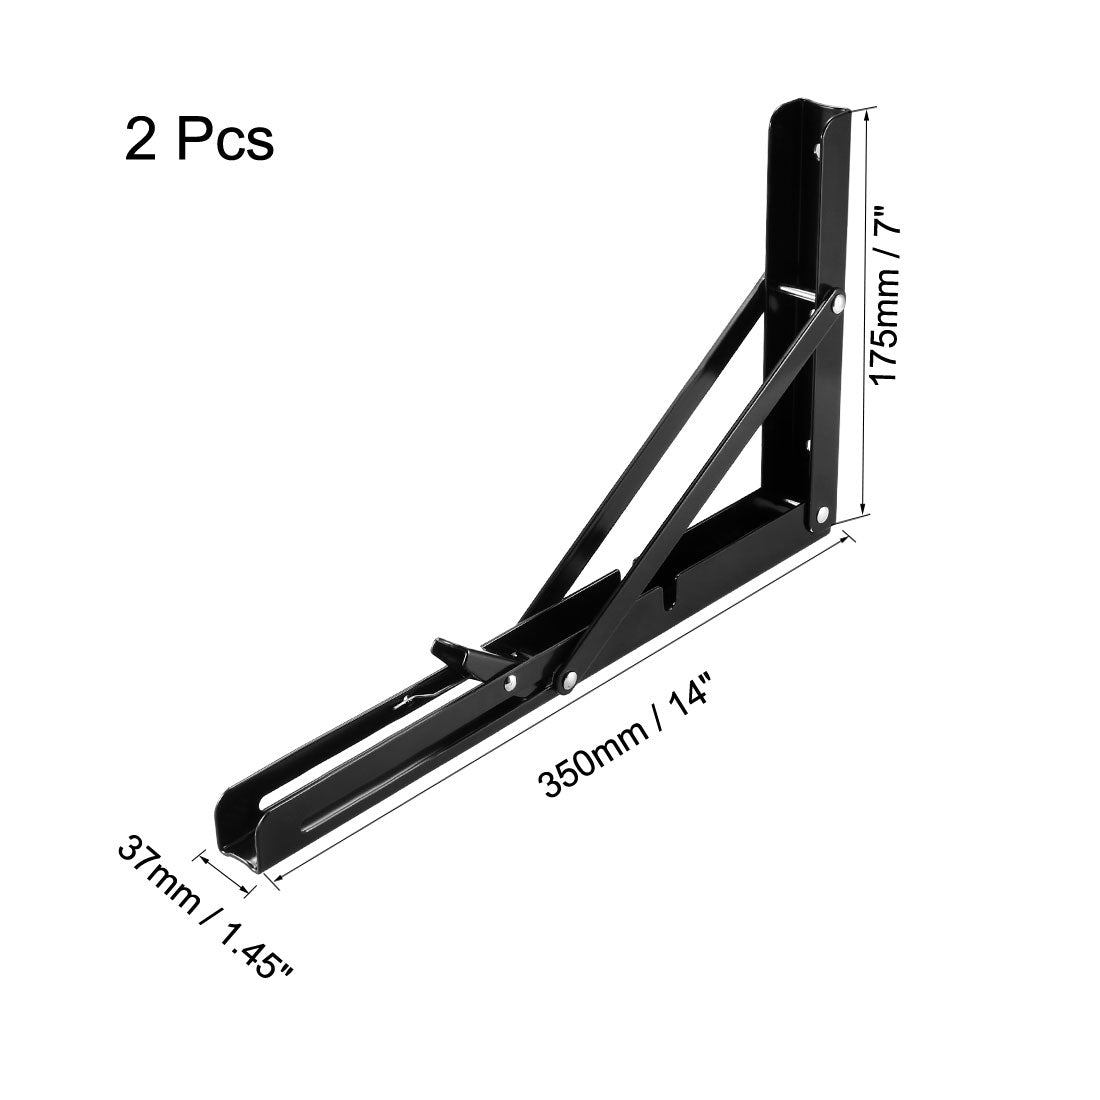 uxcell Uxcell Folding Bracket 14 inch 350mm for Shelves Table Desk Wall Mounted Support Collapsible Long Release Arm Space Saving Carbon Steel 2pcs